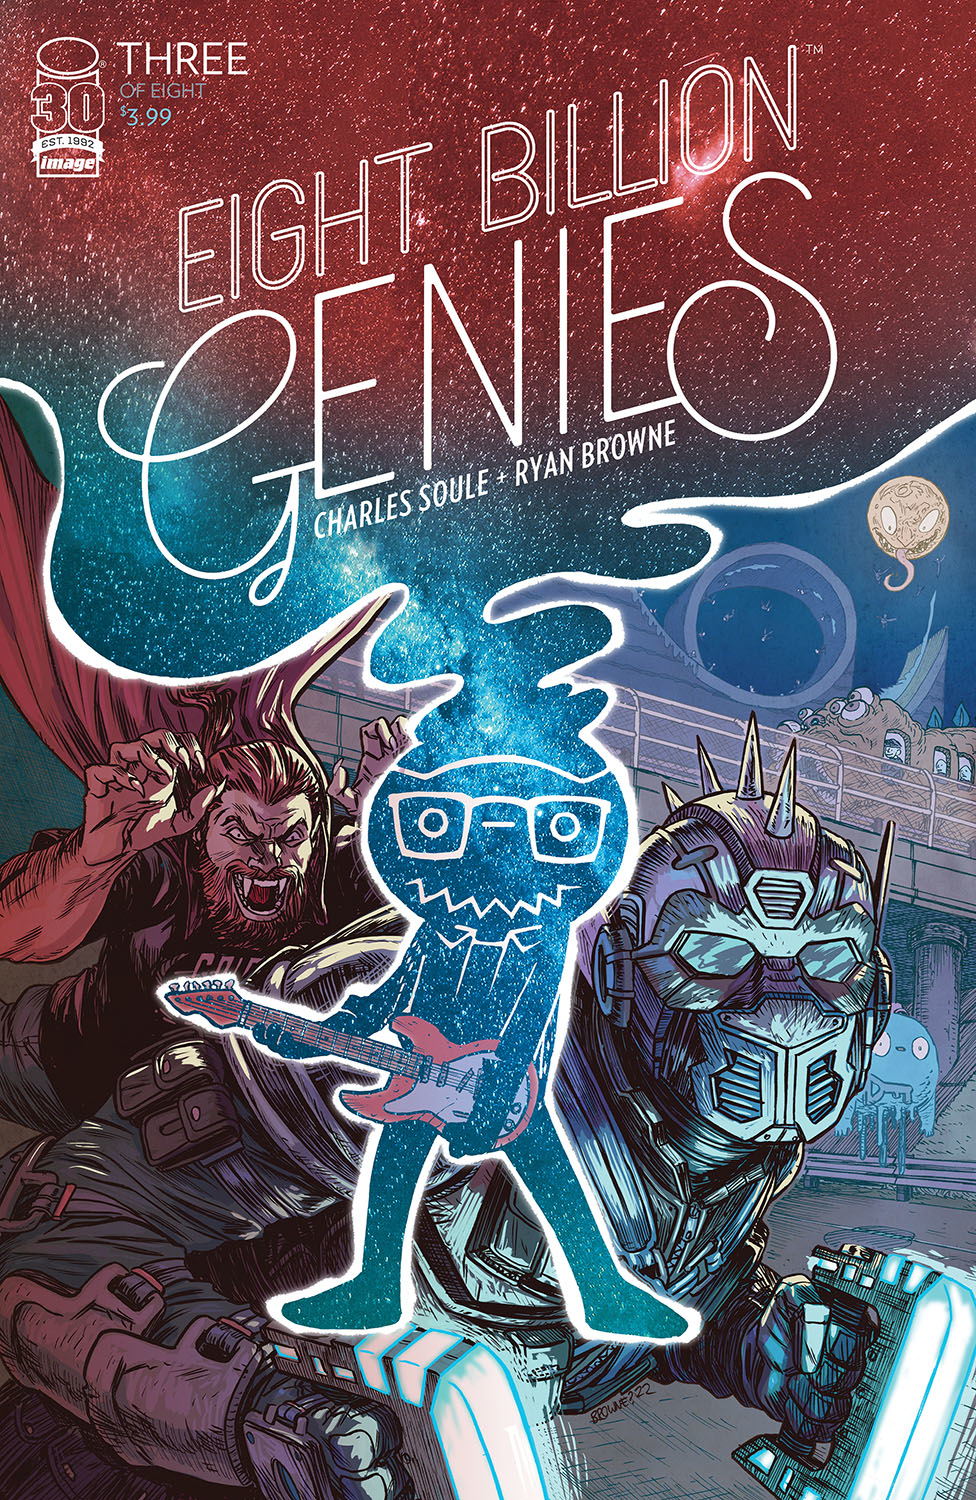 Eight Billion Genies #3 Cover A Browne (Mature) (Of 8)